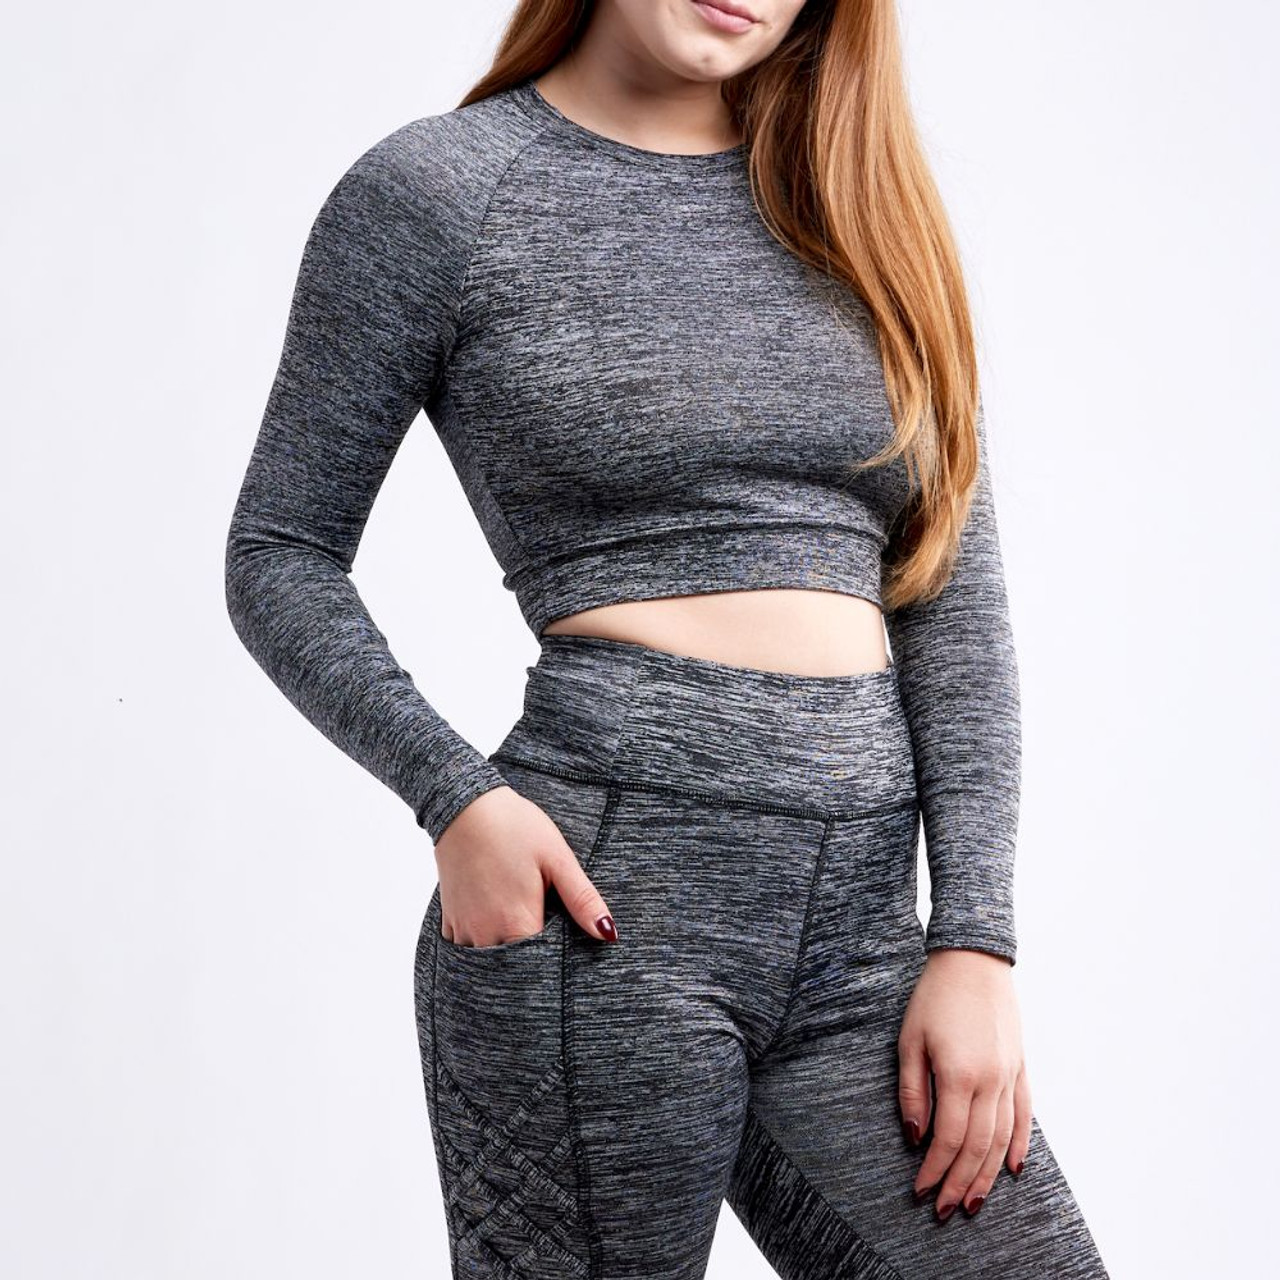 Women's Long Sleeve Round Neck Crop Top product image